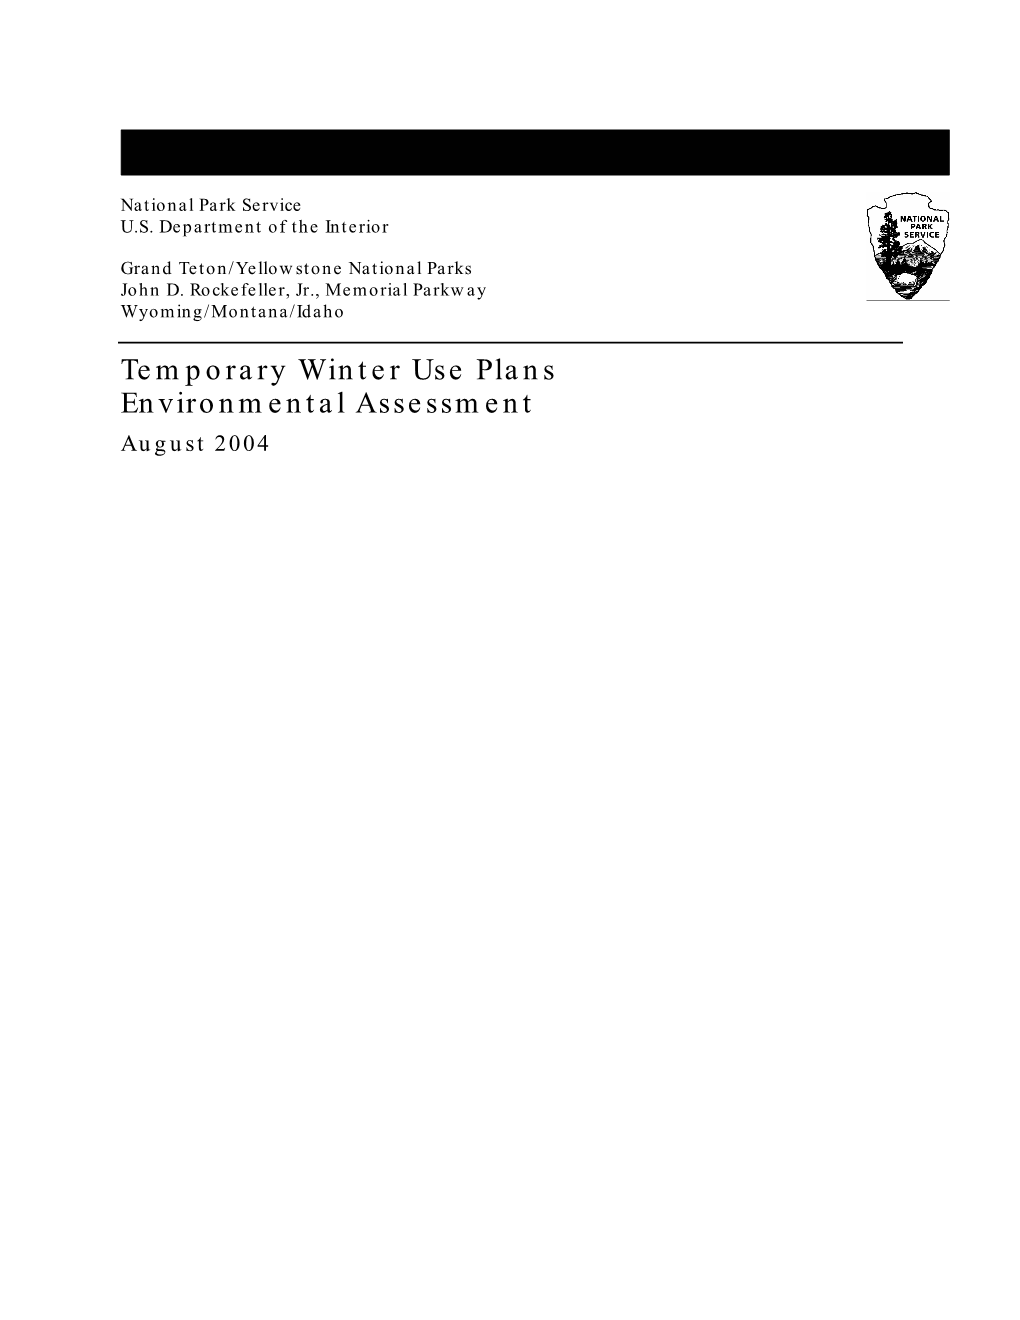 Temporary Winter Use Plans Environmental Assessment August 2004